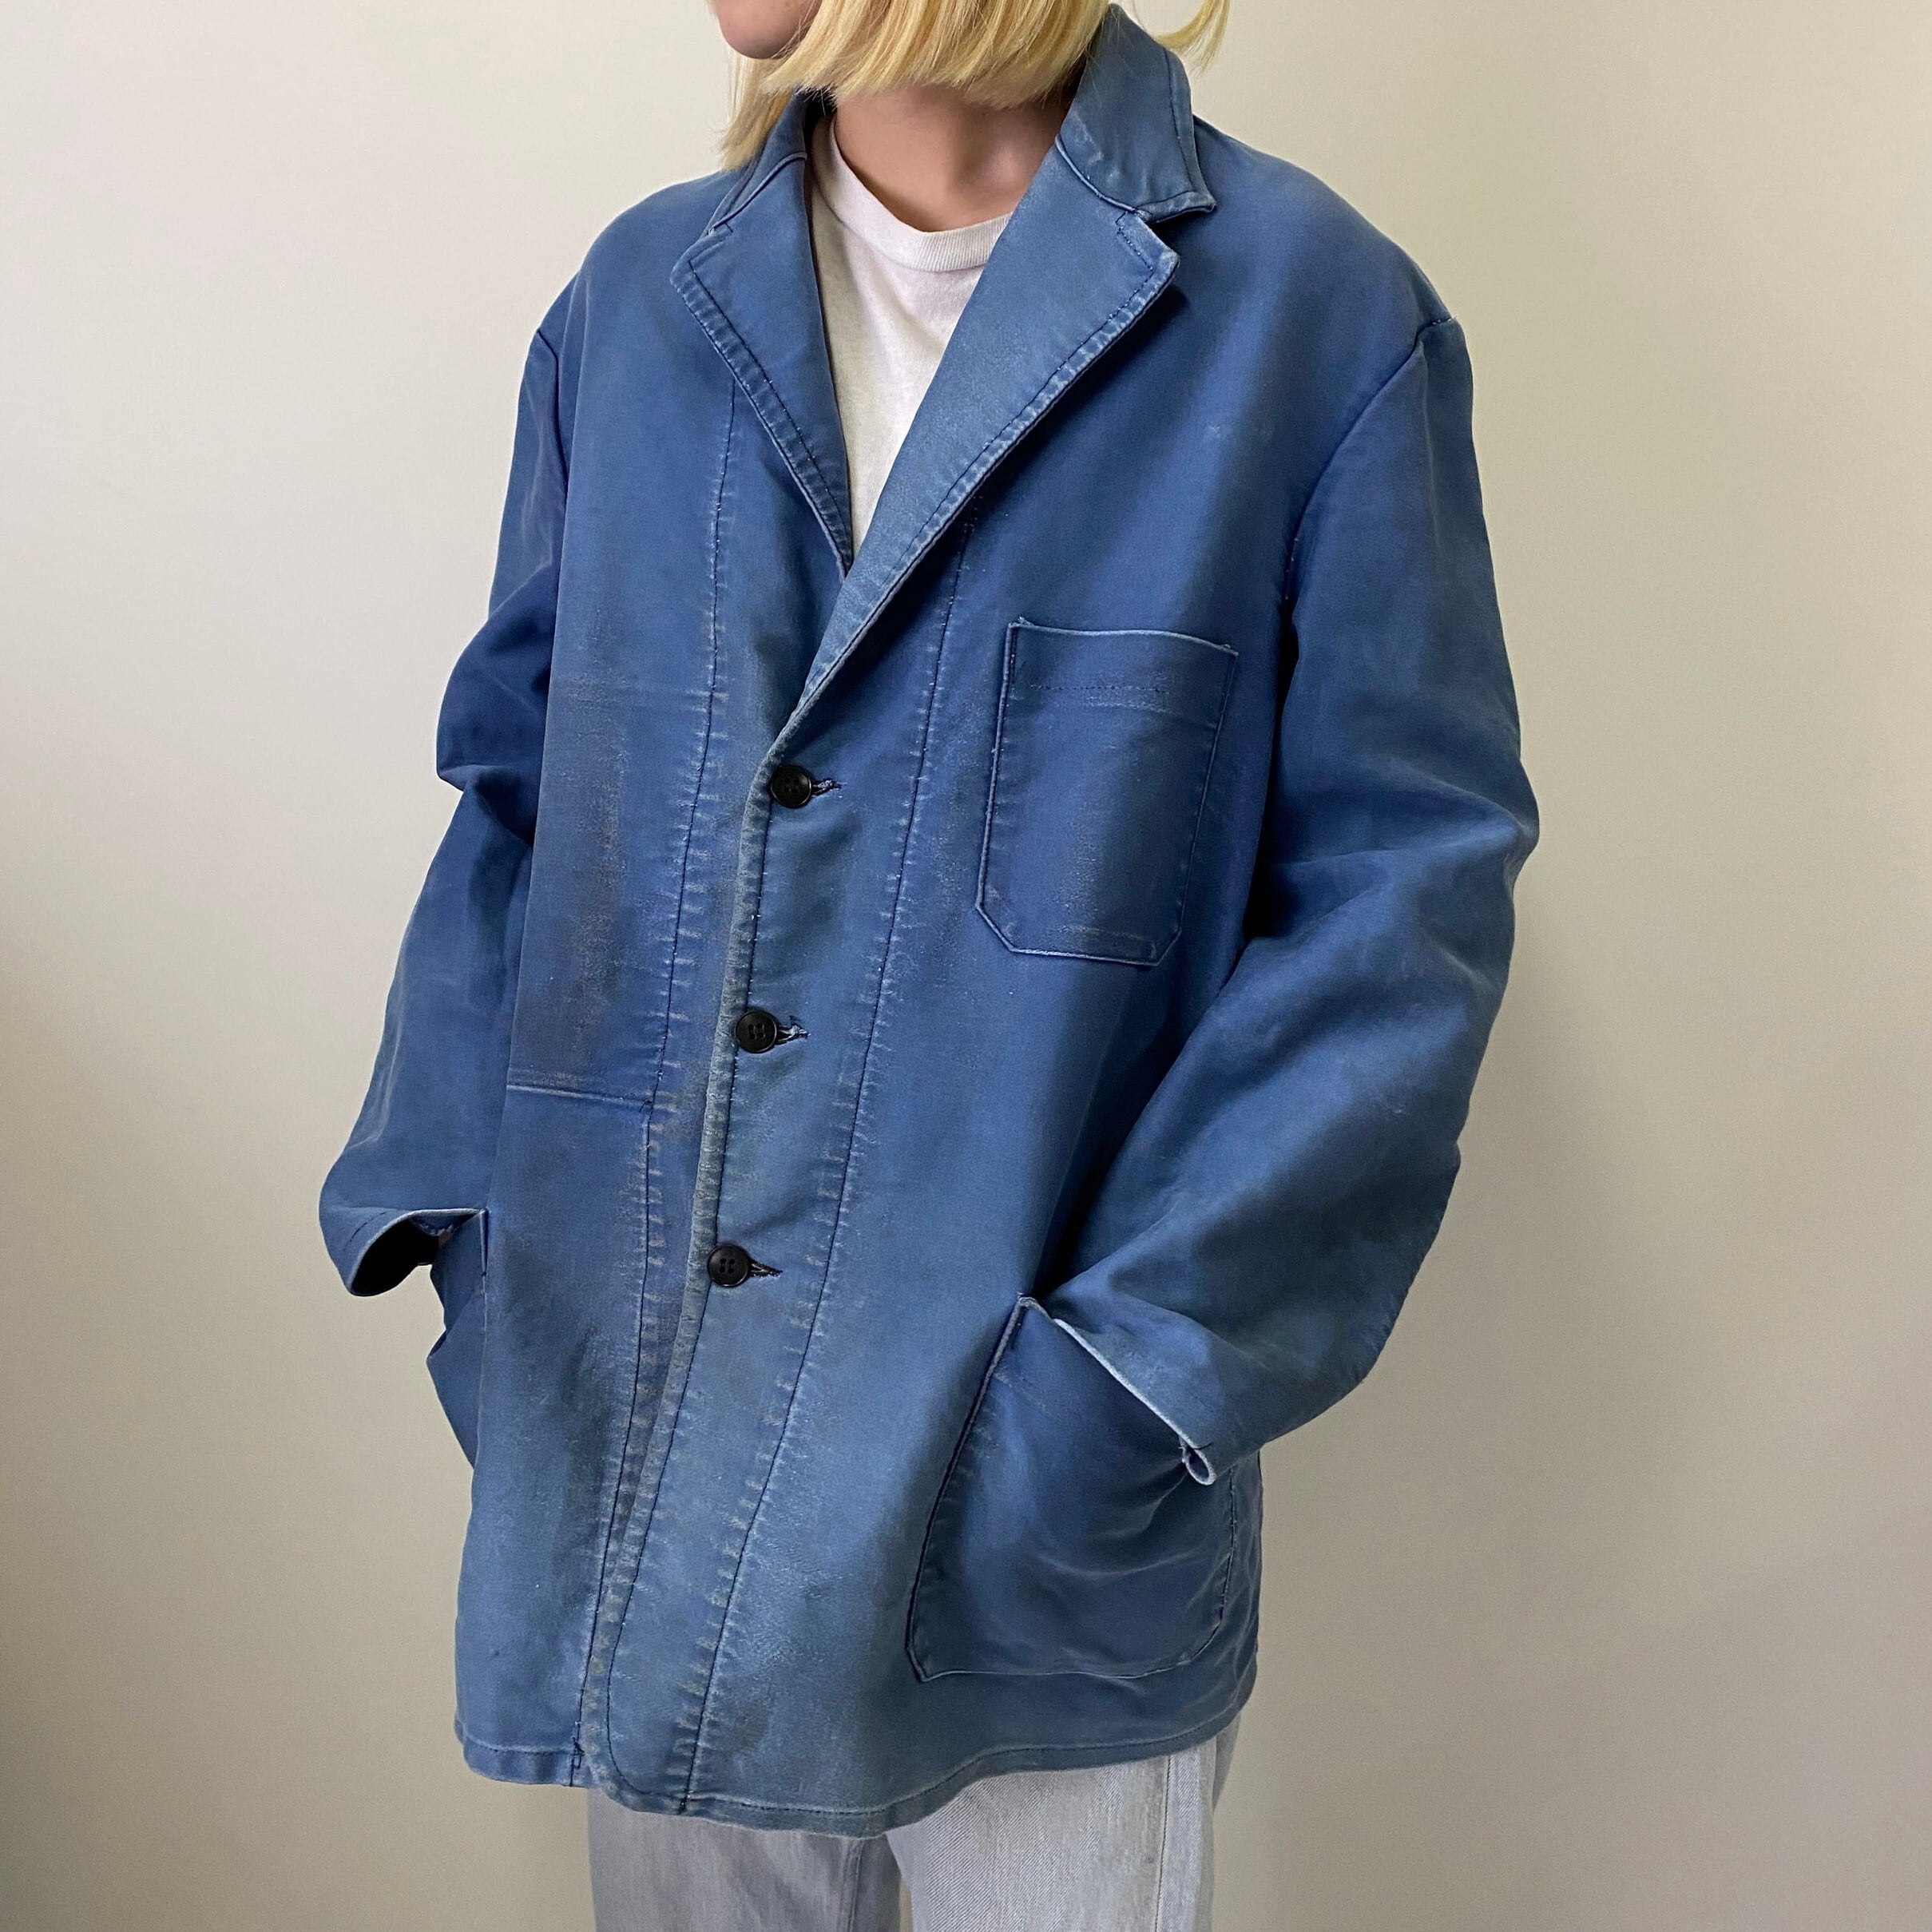 recommend》euro work wear | cave 古着屋【公式】古着通販サイト